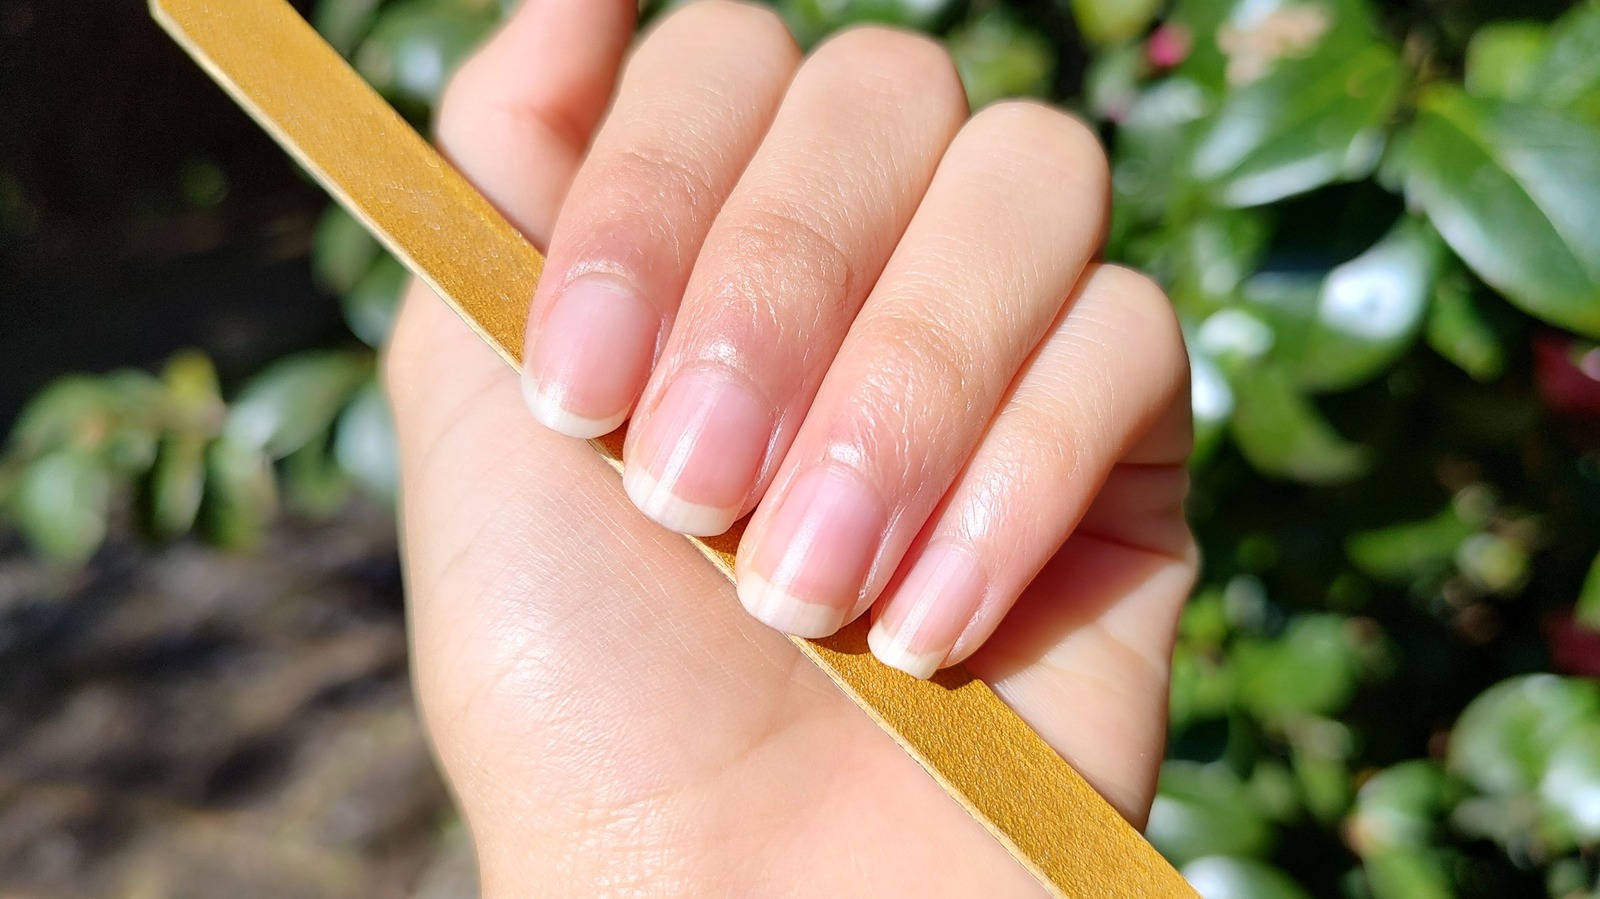 How To Clean Your Nails Properly